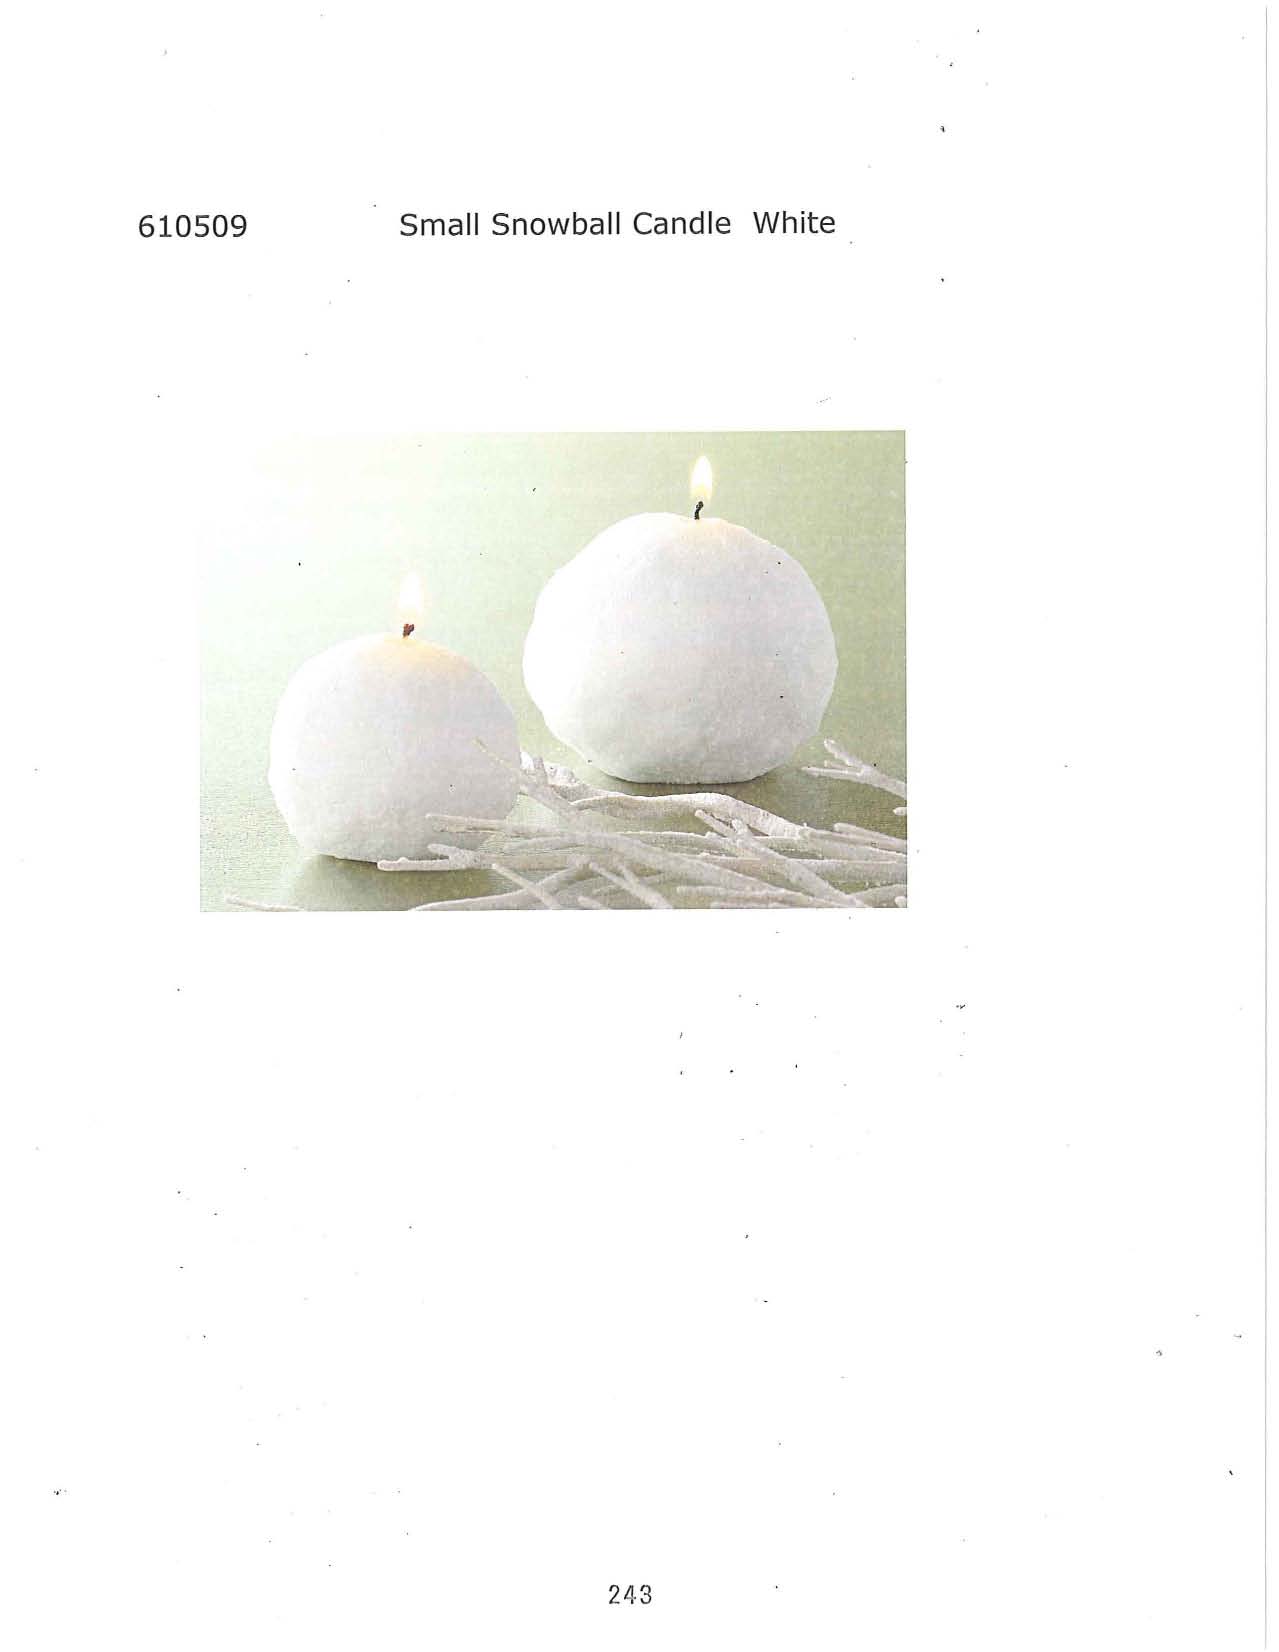 Small Snowball Candle - White